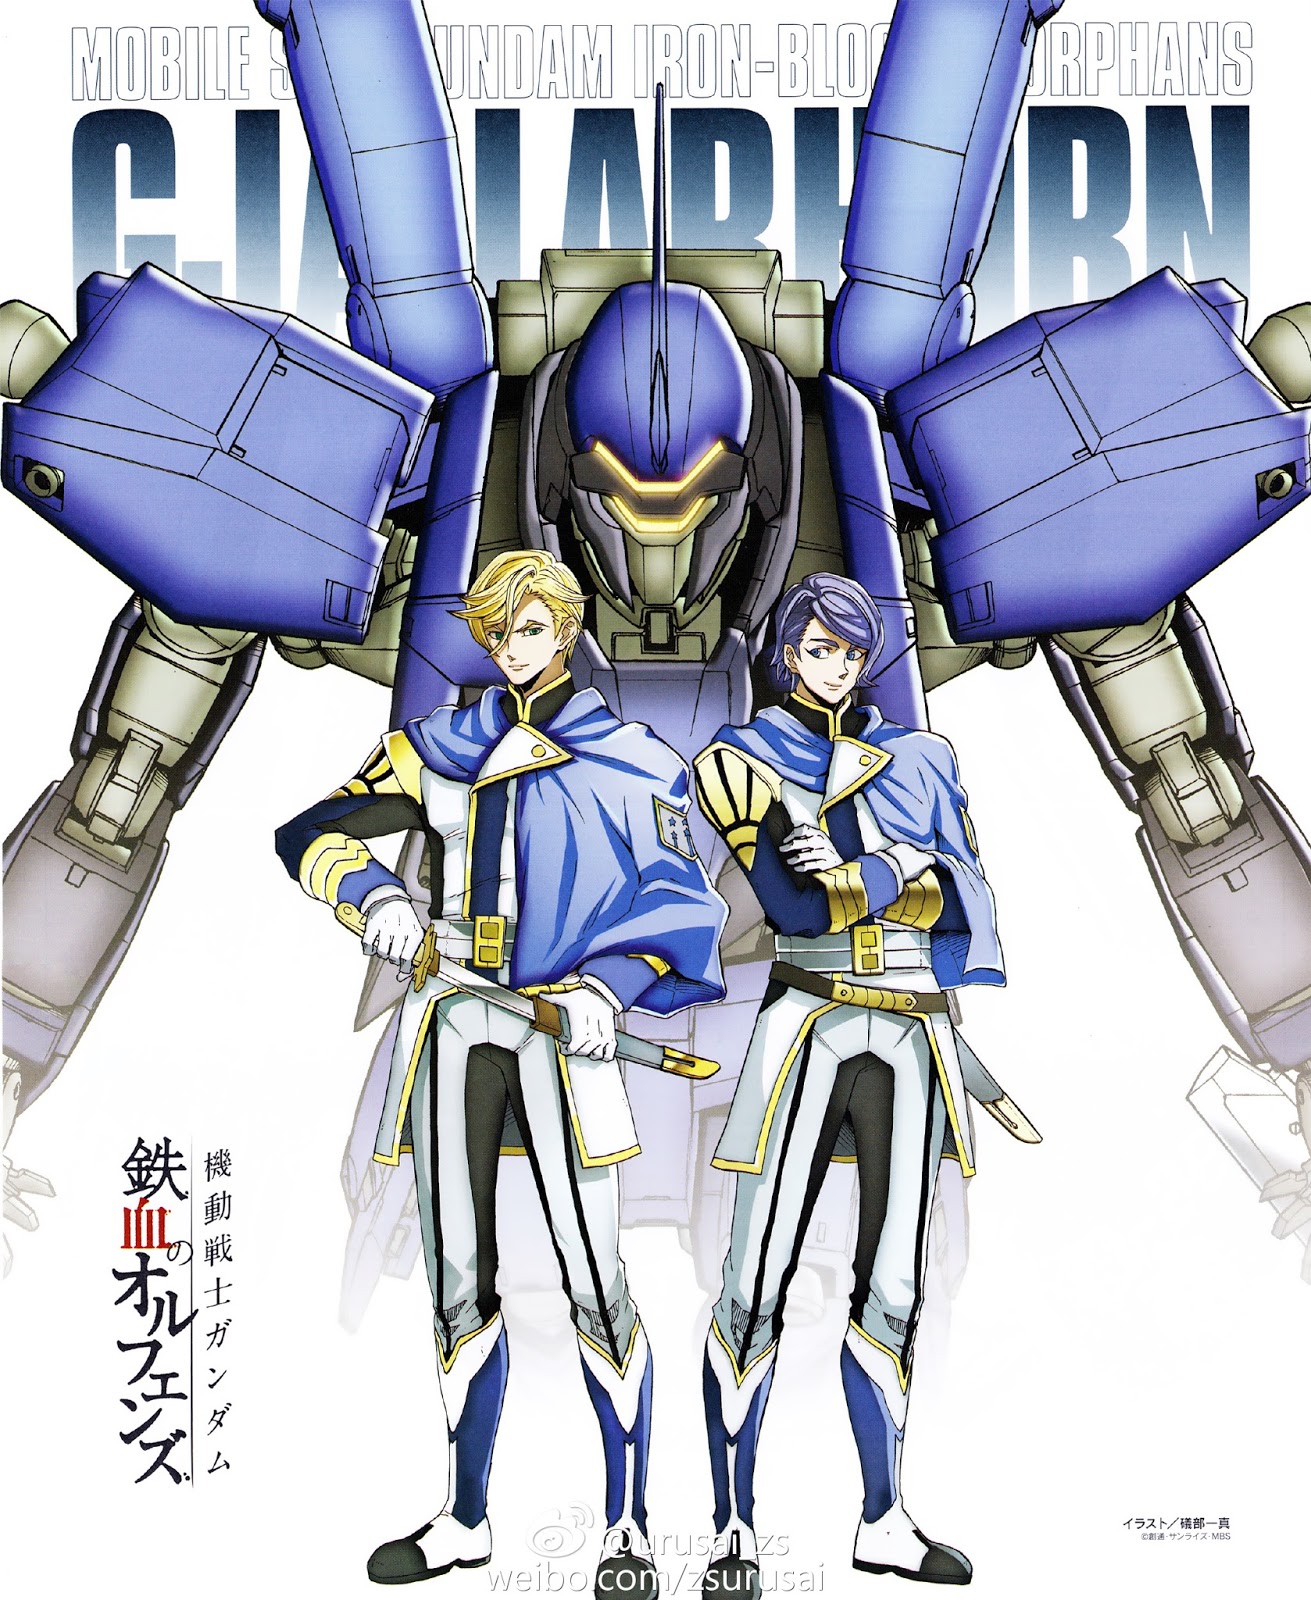 Mobile Suit Gundam: Iron-Blooded Orphans #8